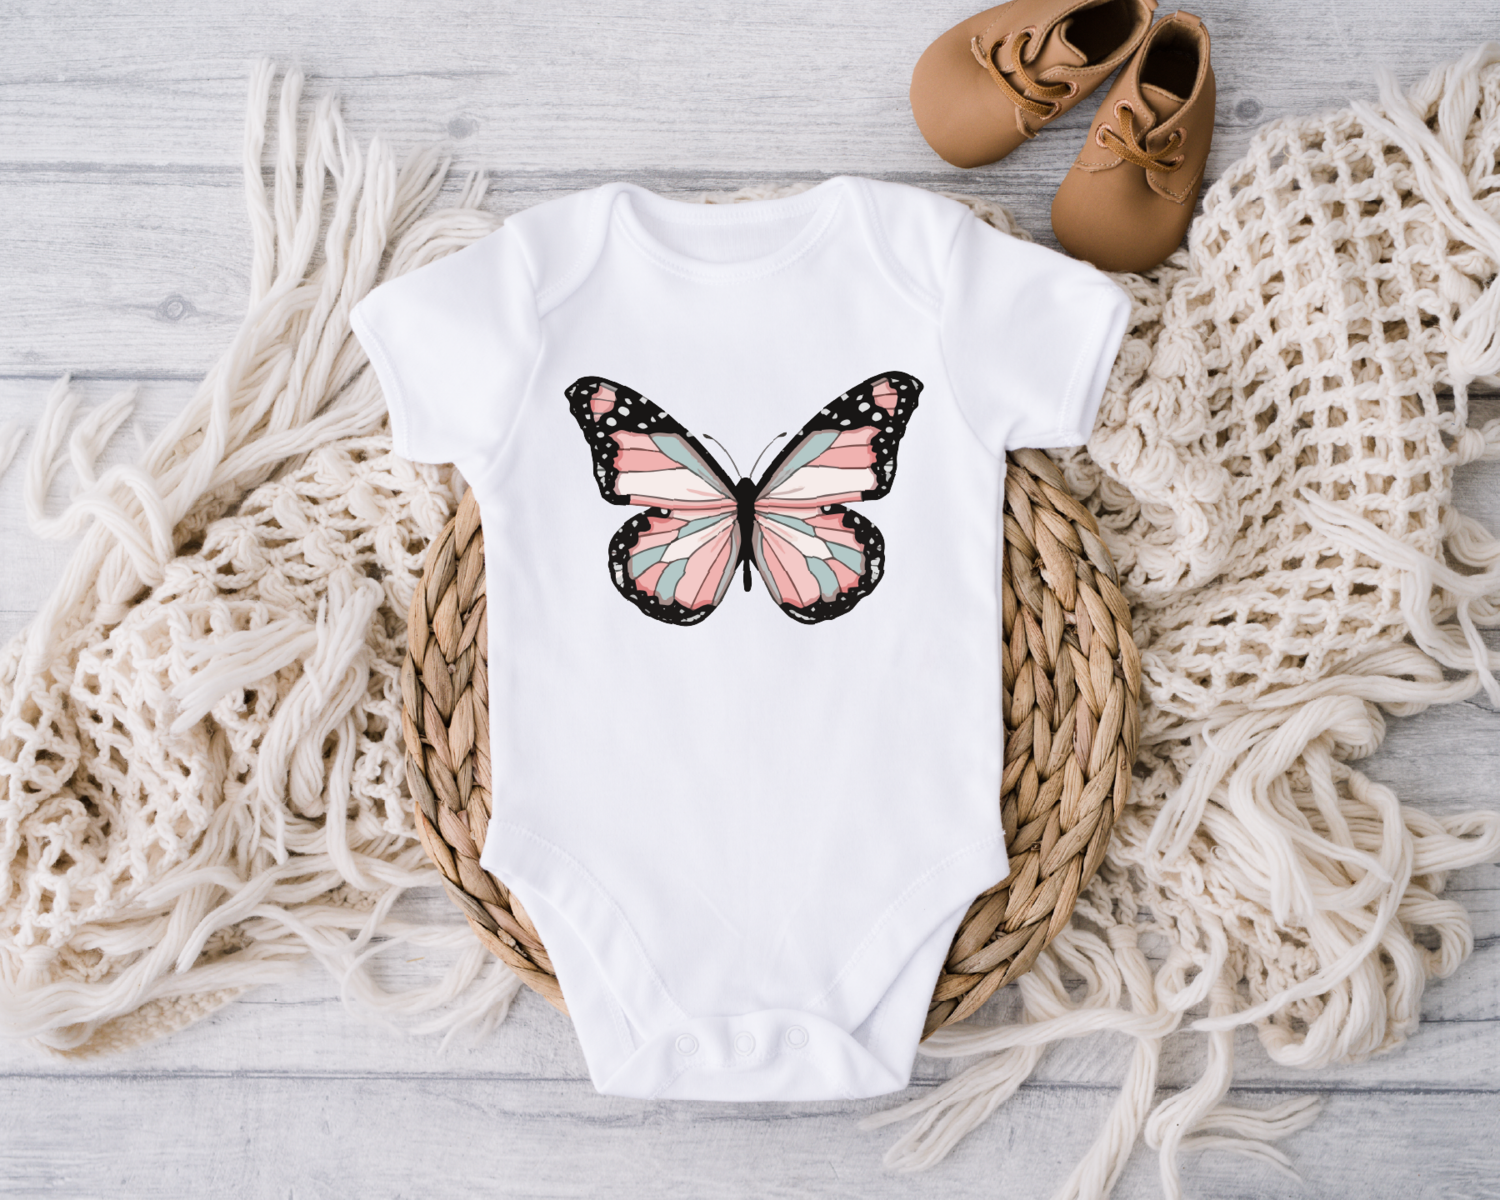 Cute Butterfly Baby Onesie, Butterfly Baby Clothes, Funny Animal Onesie, Butterfly Bodysuit